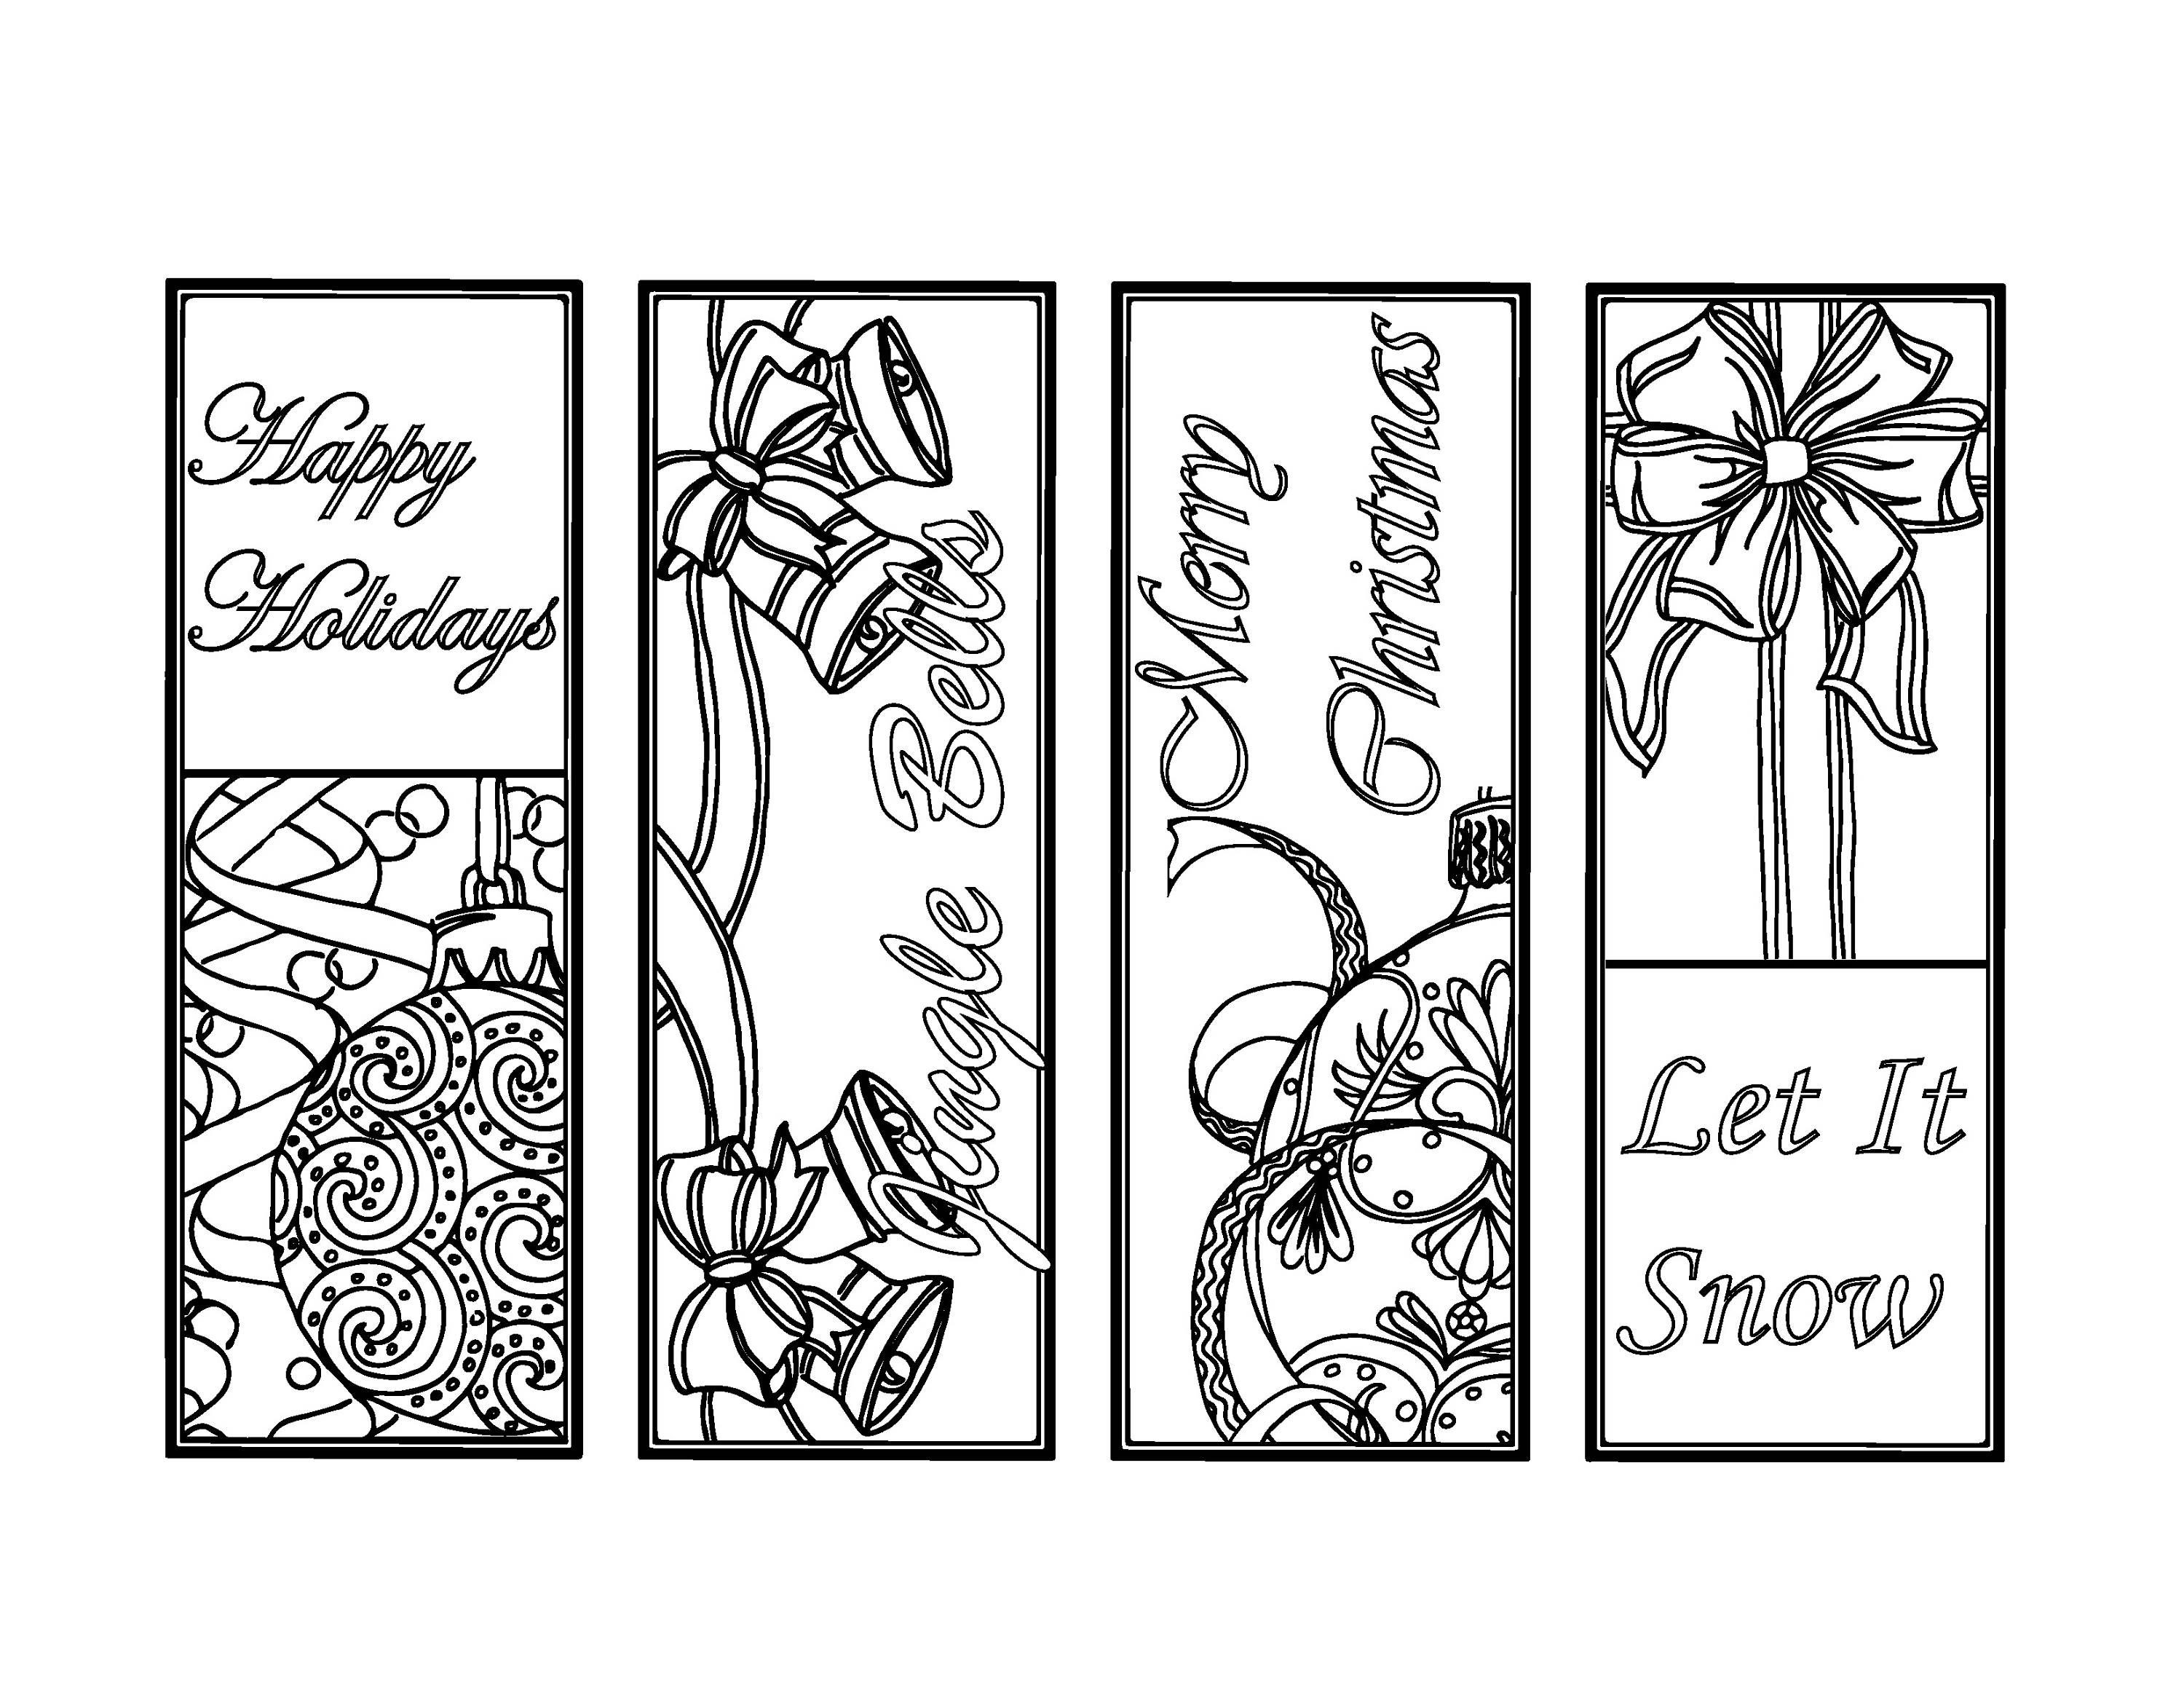 Christmas Coloring Pages Mistletoe Christmas Bookmarks To Color - Free Printable Christmas Bookmarks To Color